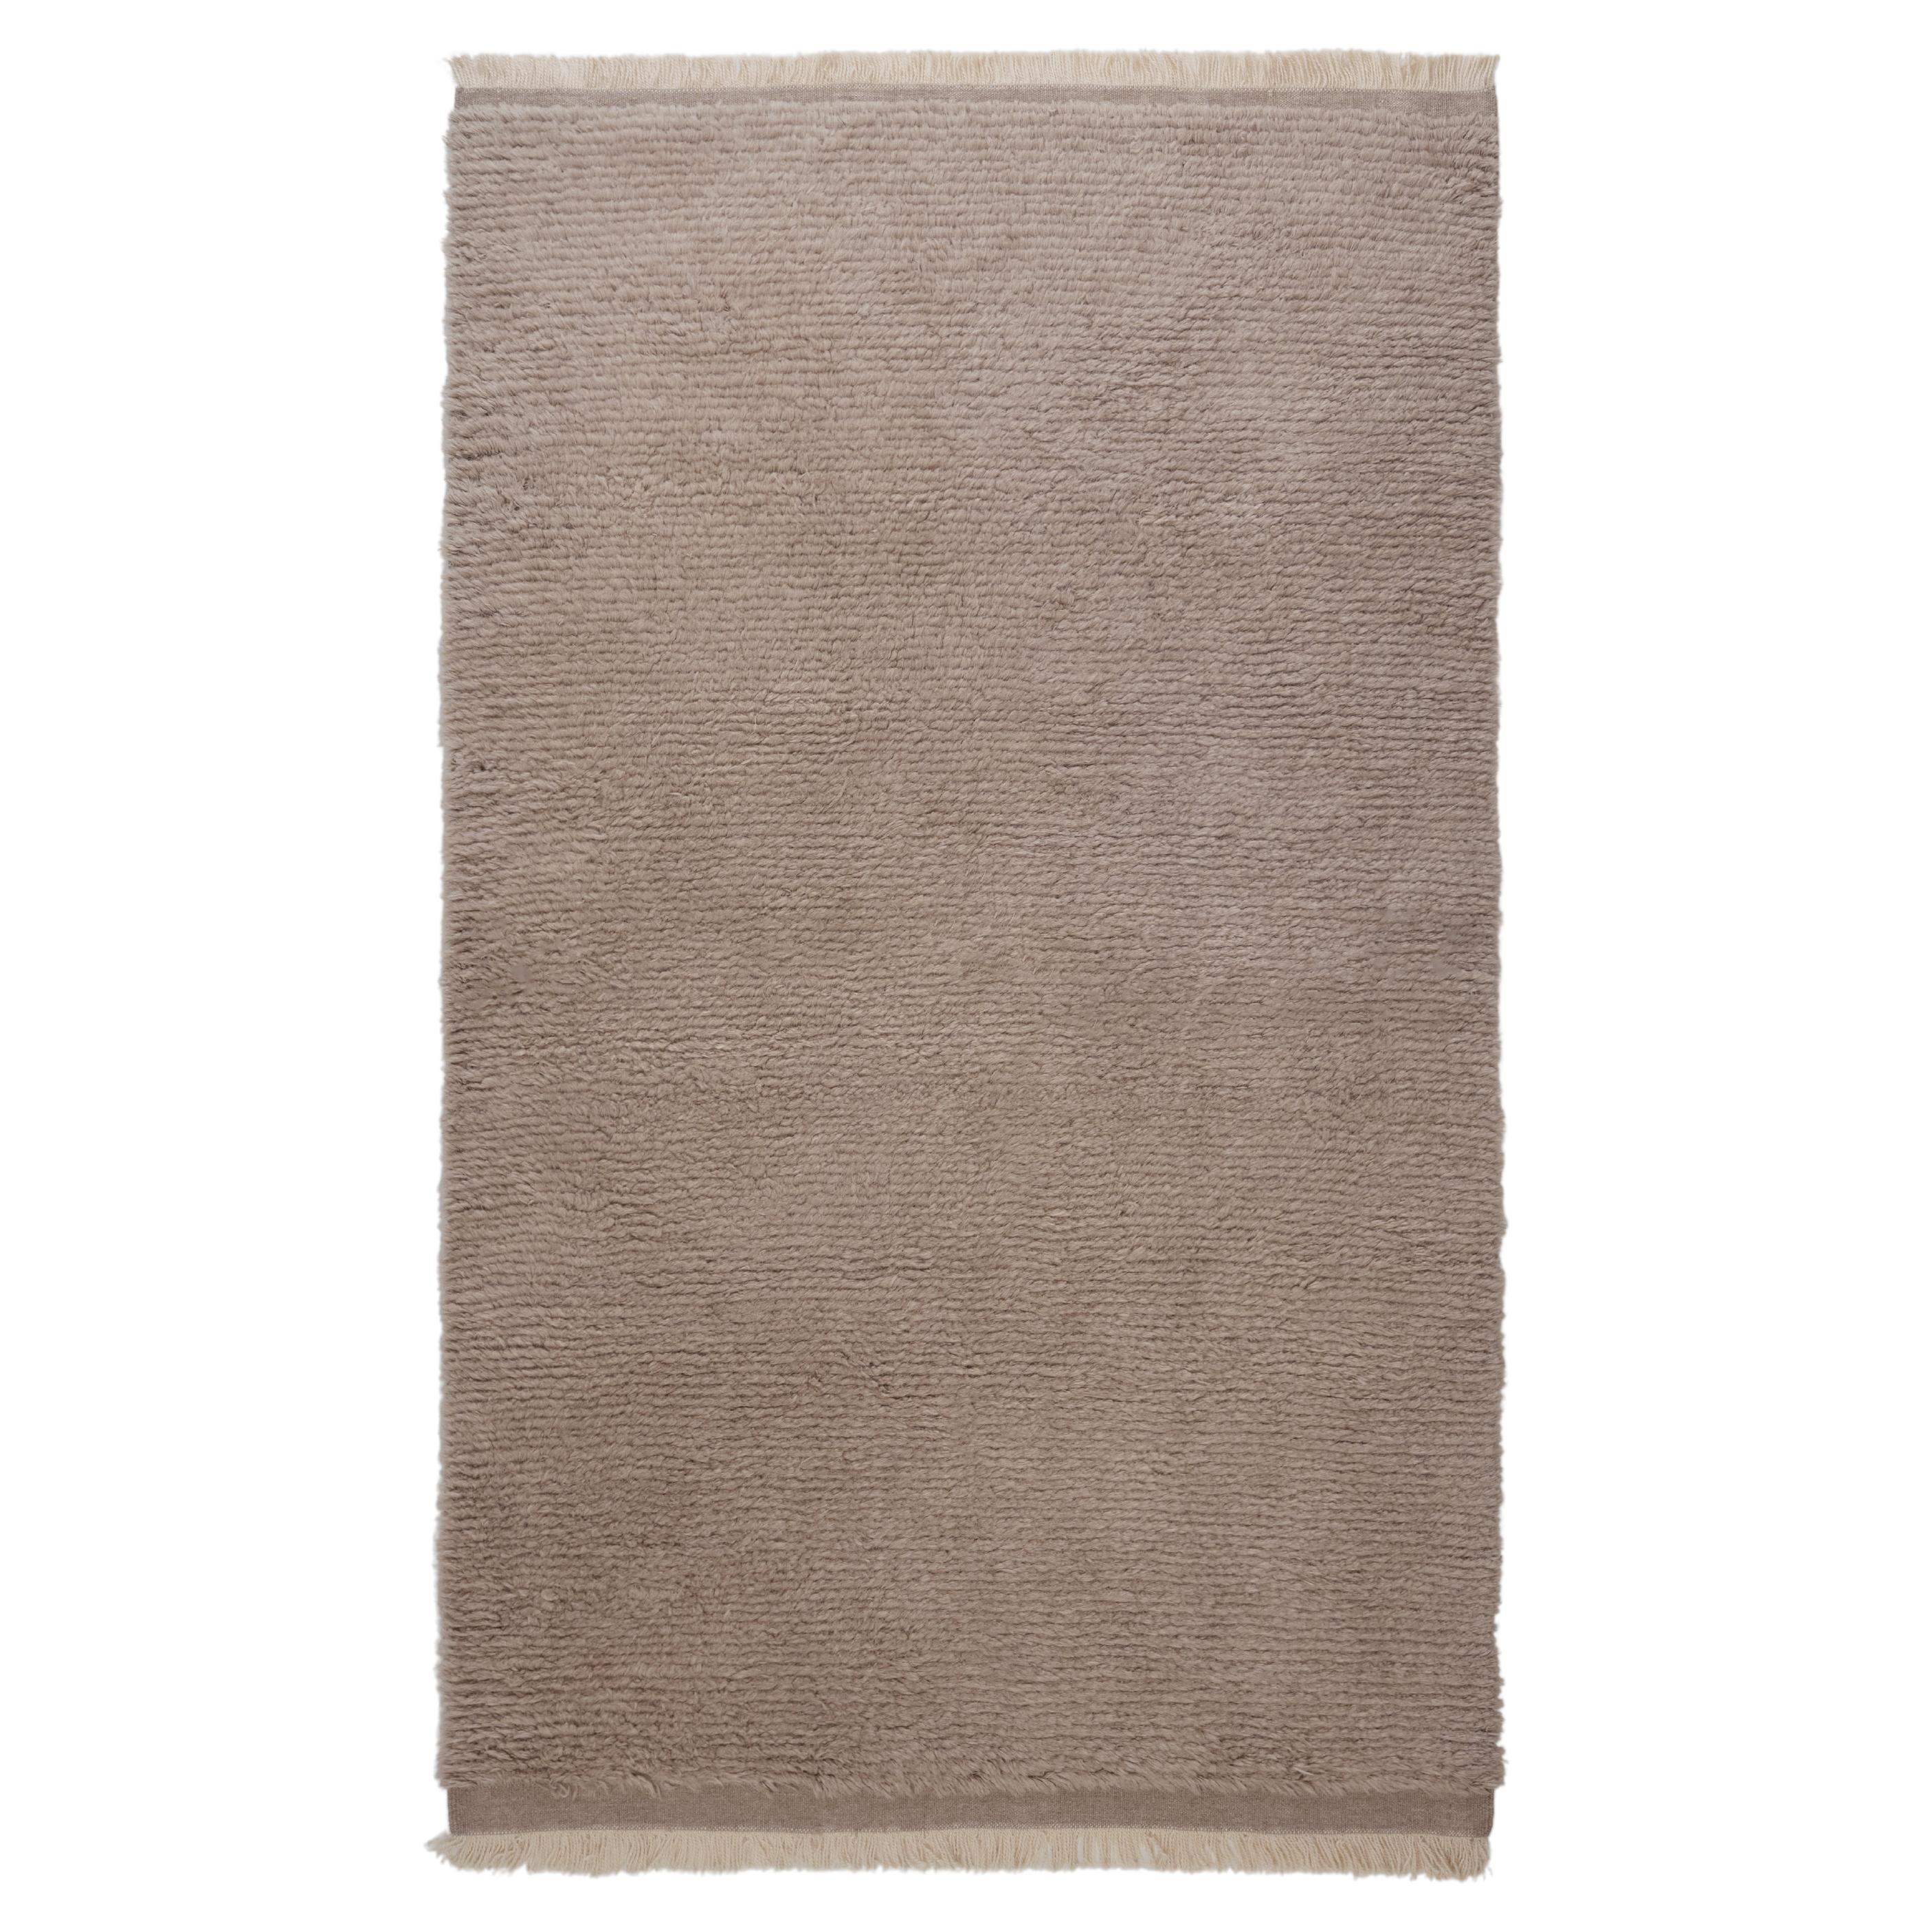 The Forsyth Woolly Shag Rug - Short Pile, Taupe, 6x9 For Sale